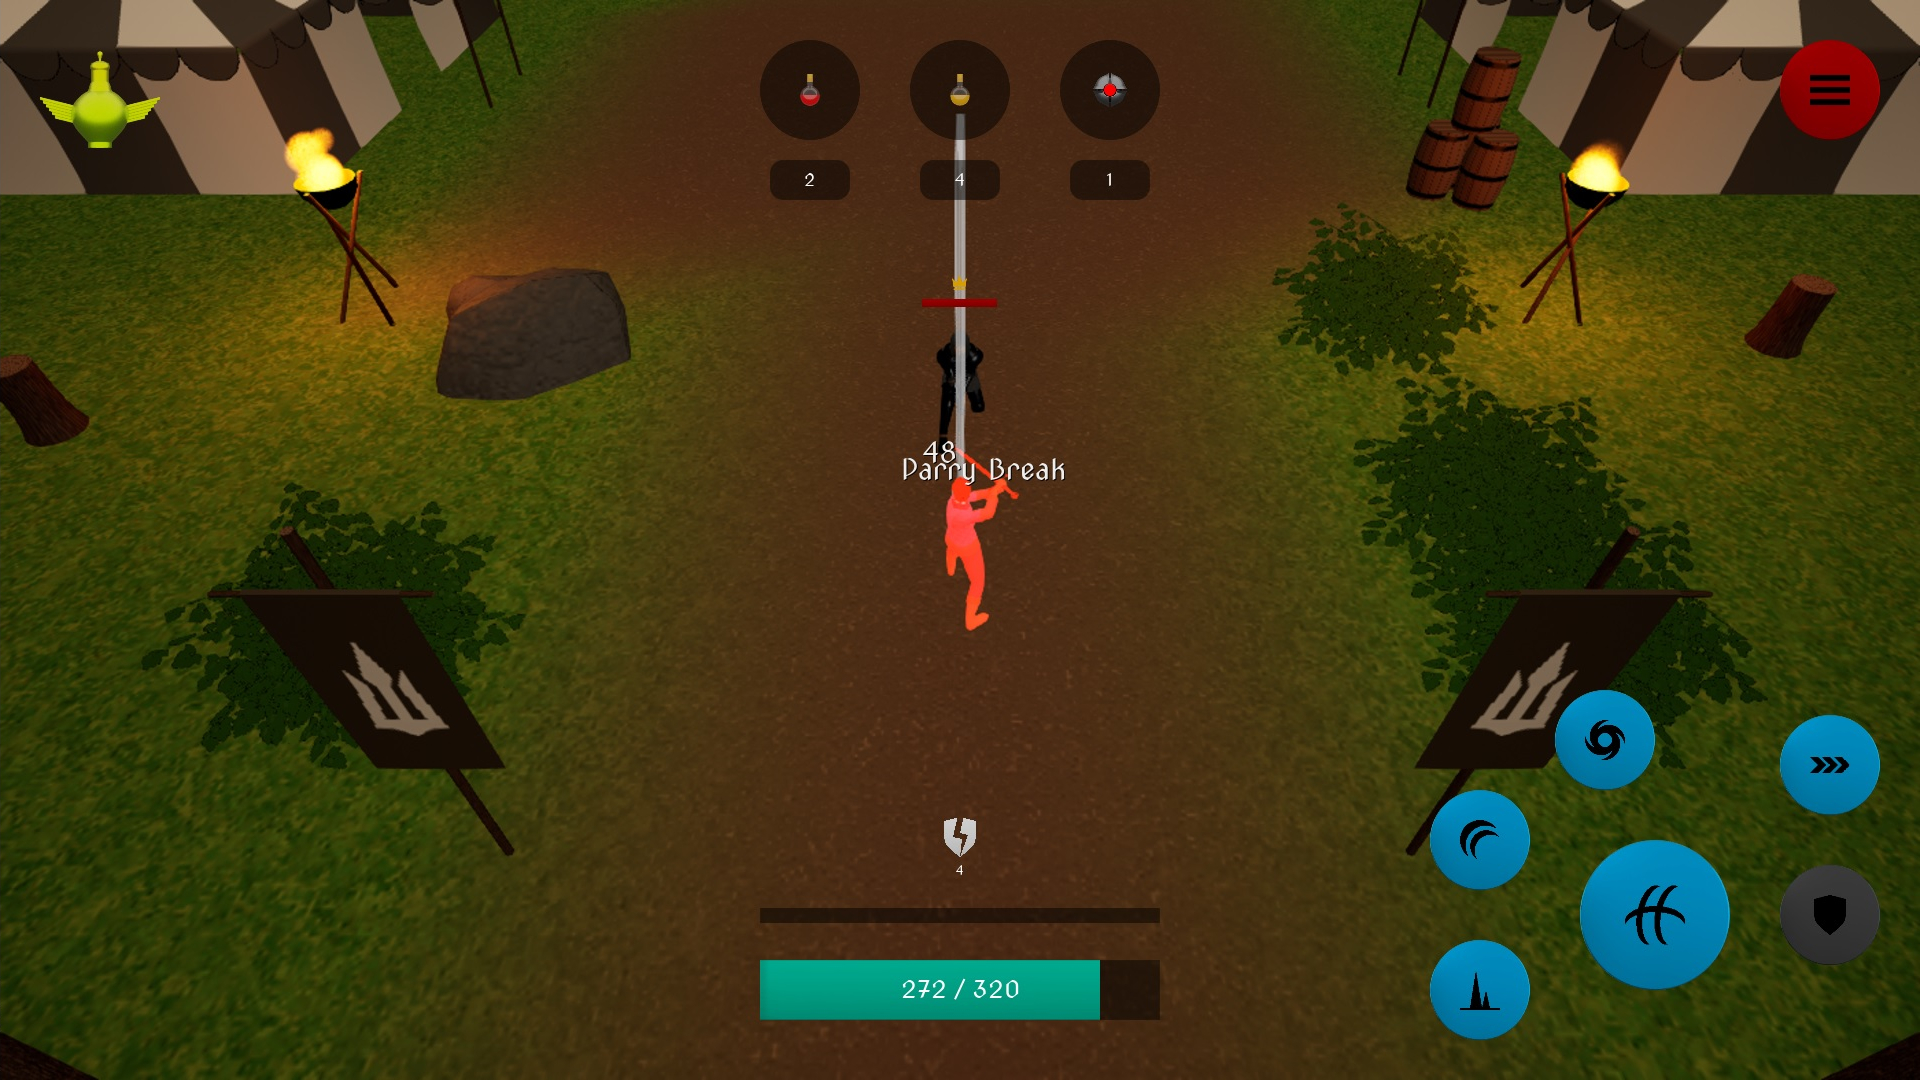 Gallant - Medieval Battle, Extreme Sword Action Game (Android, iOS)